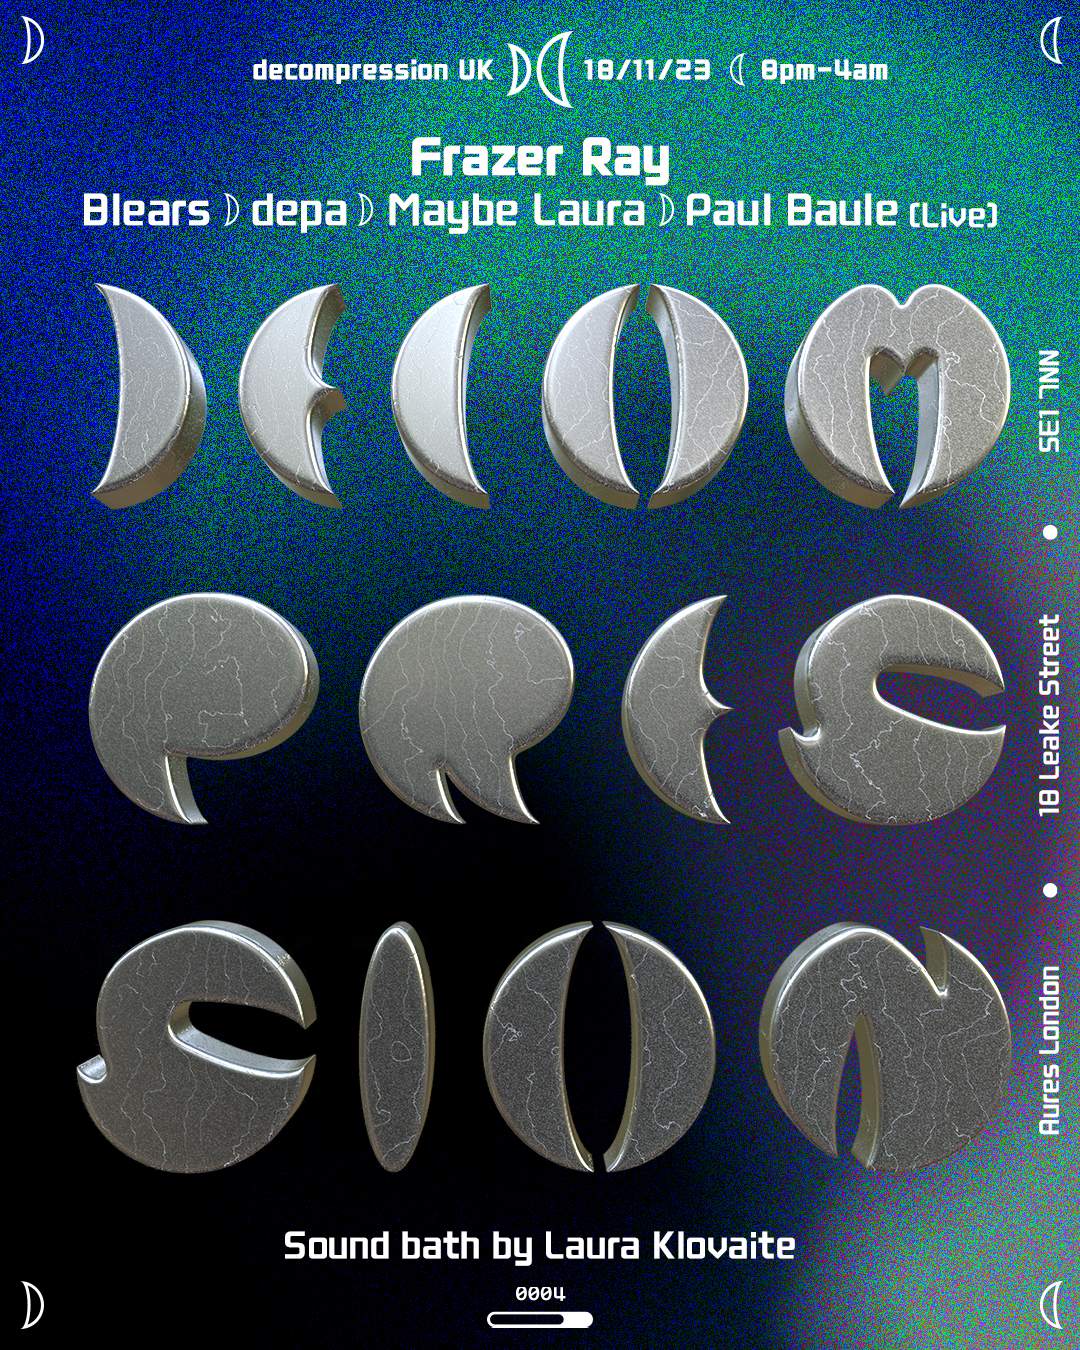 decompression vol.4 with Frazer Ray - フライヤー表